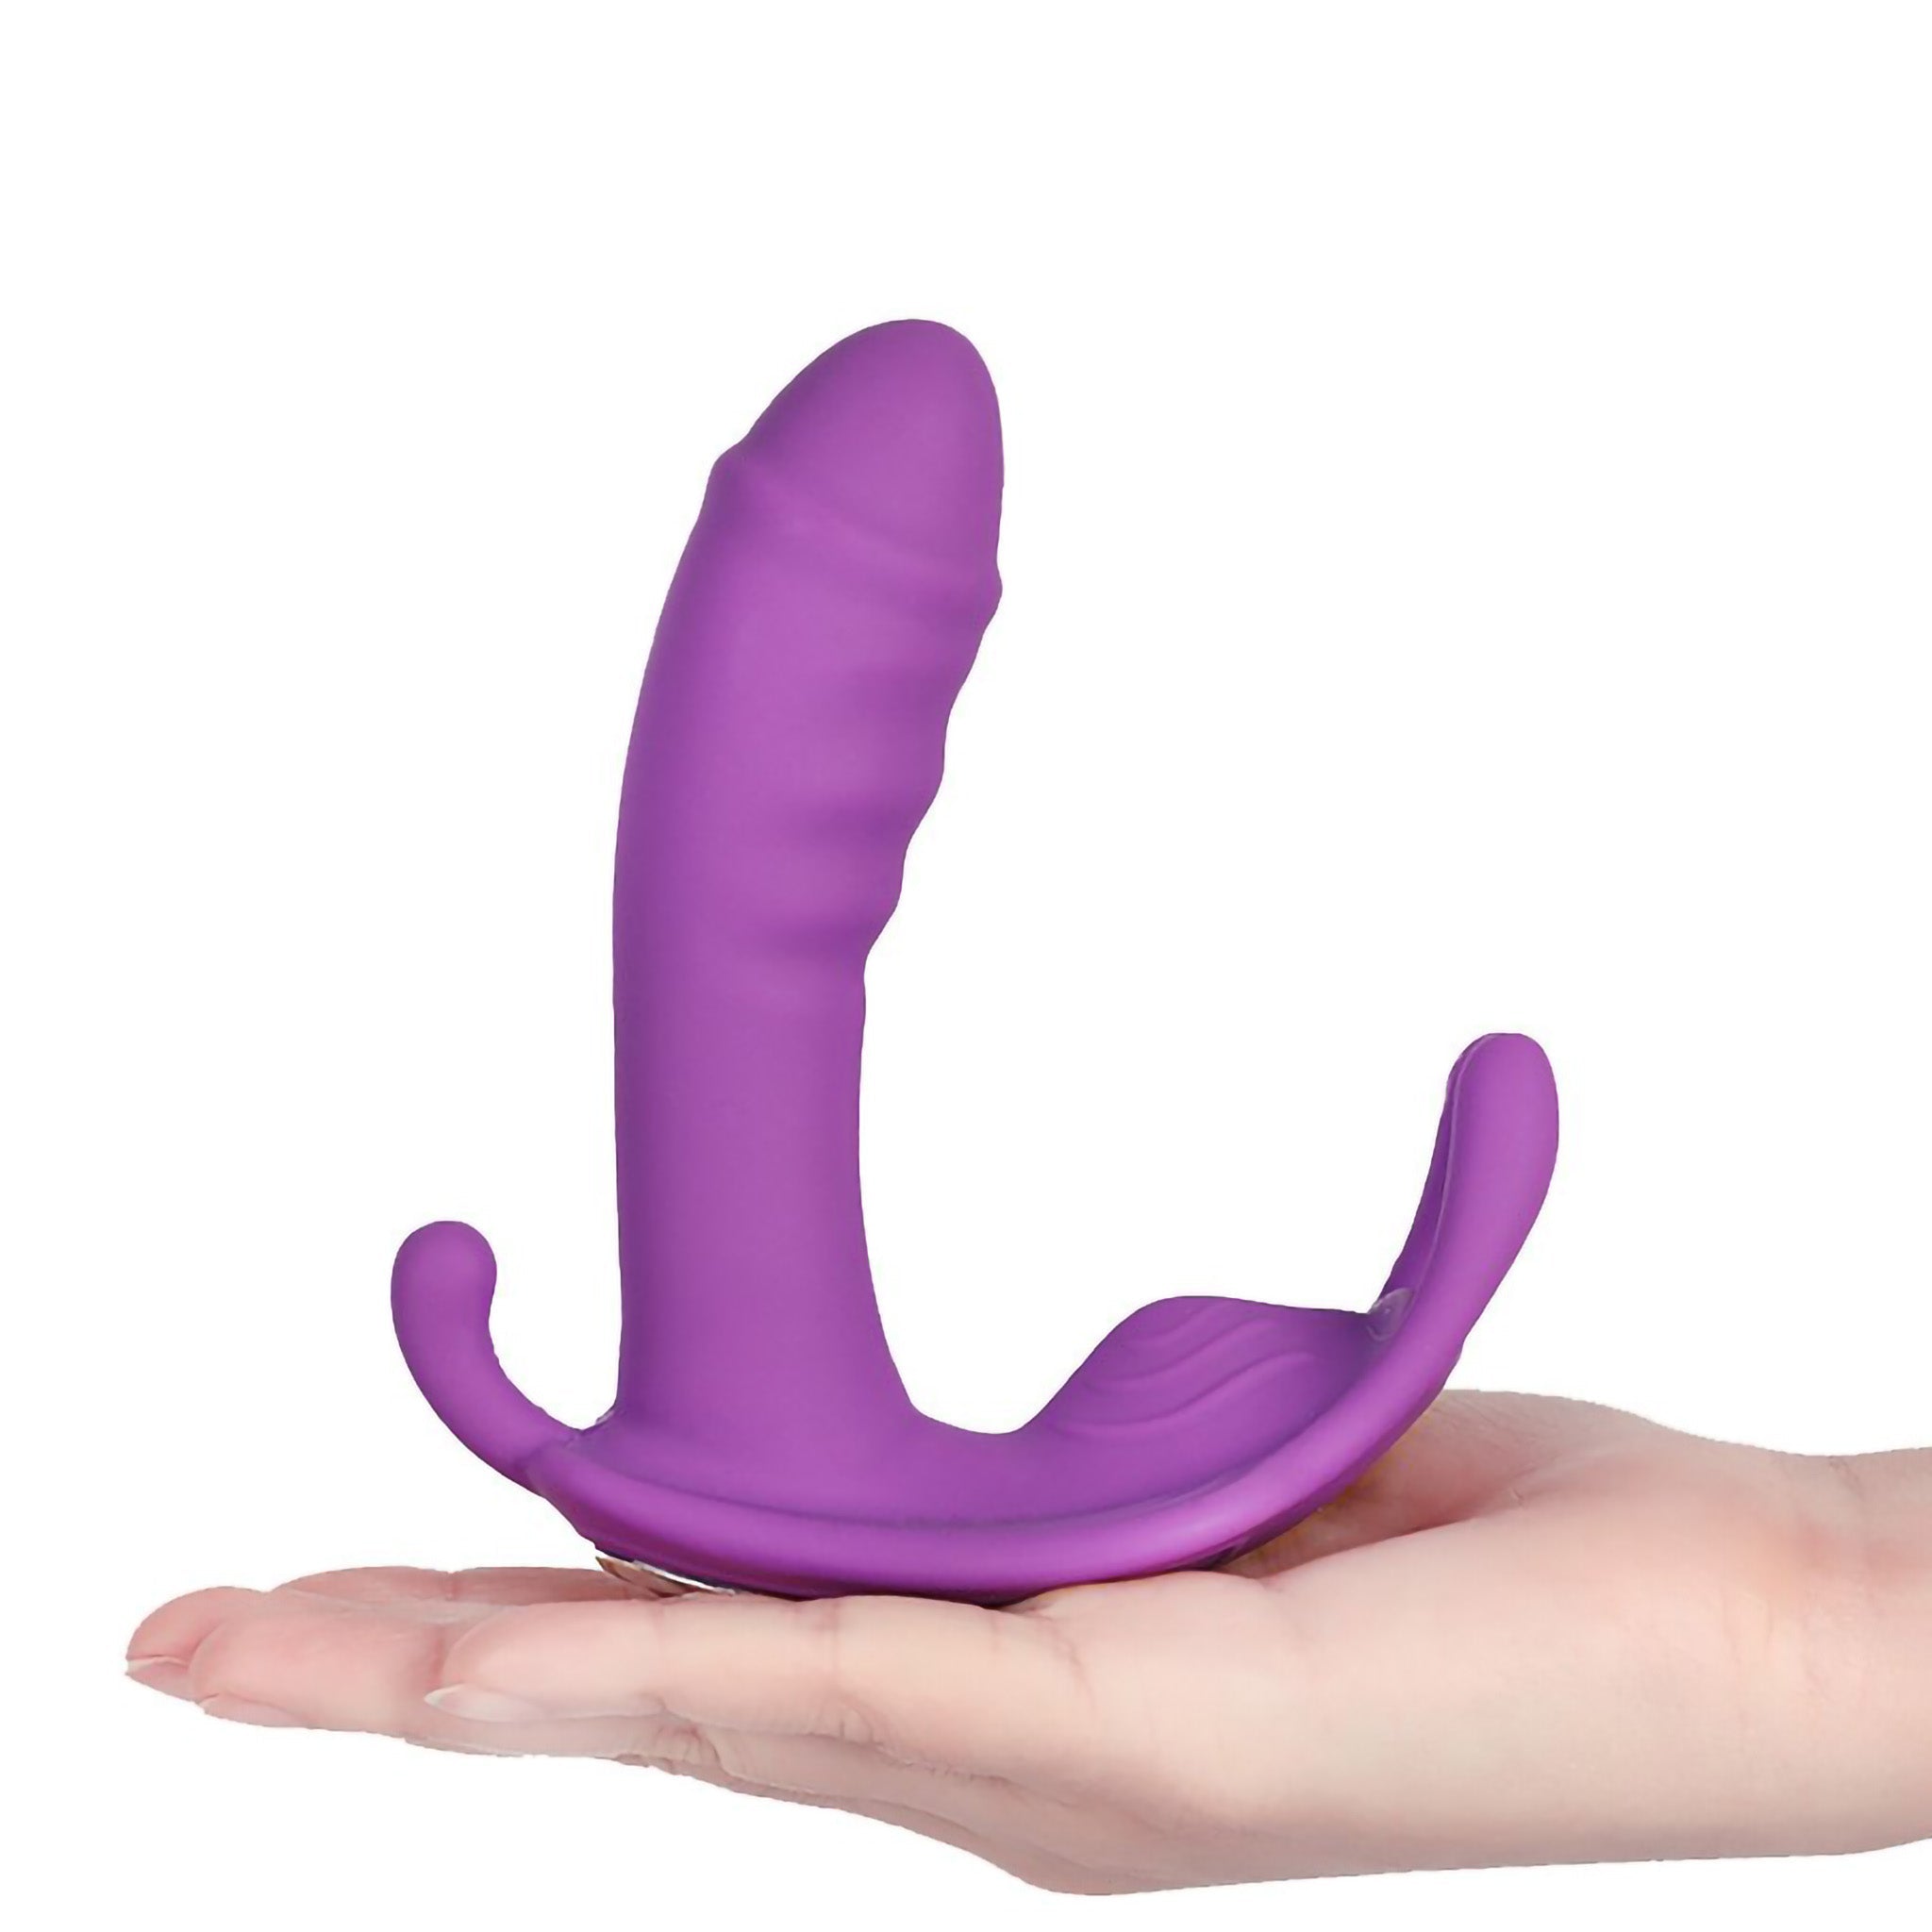 Wearable Wireless Remote Control G-spot Clit Vibrator Strap-on Vibrating Panties